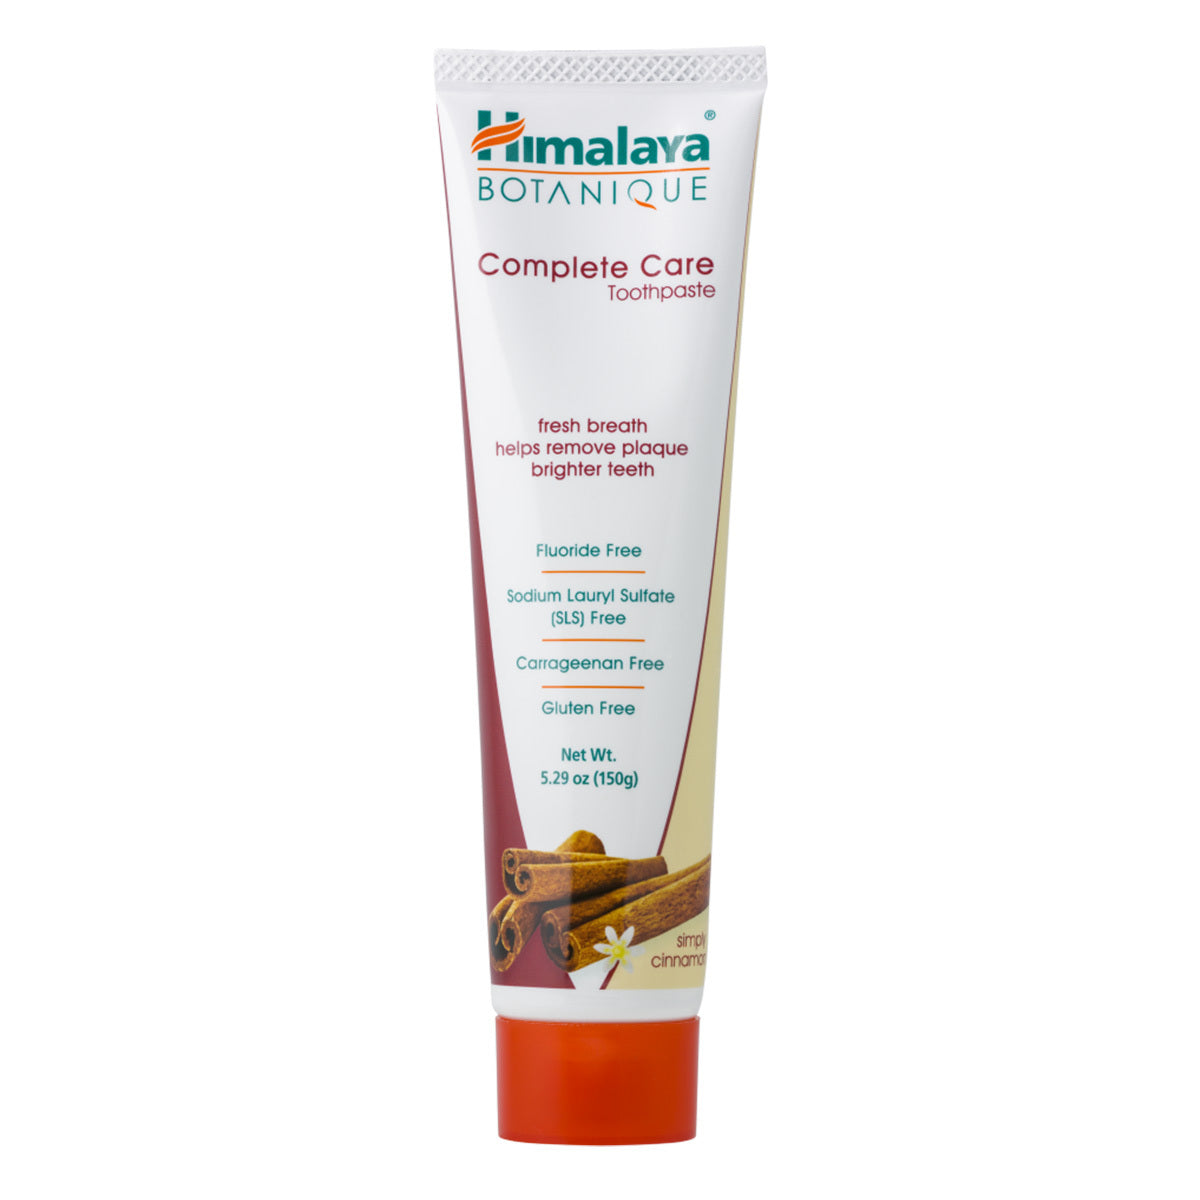 Primary image of Complete Care Simply Cinnamon Toothpaste